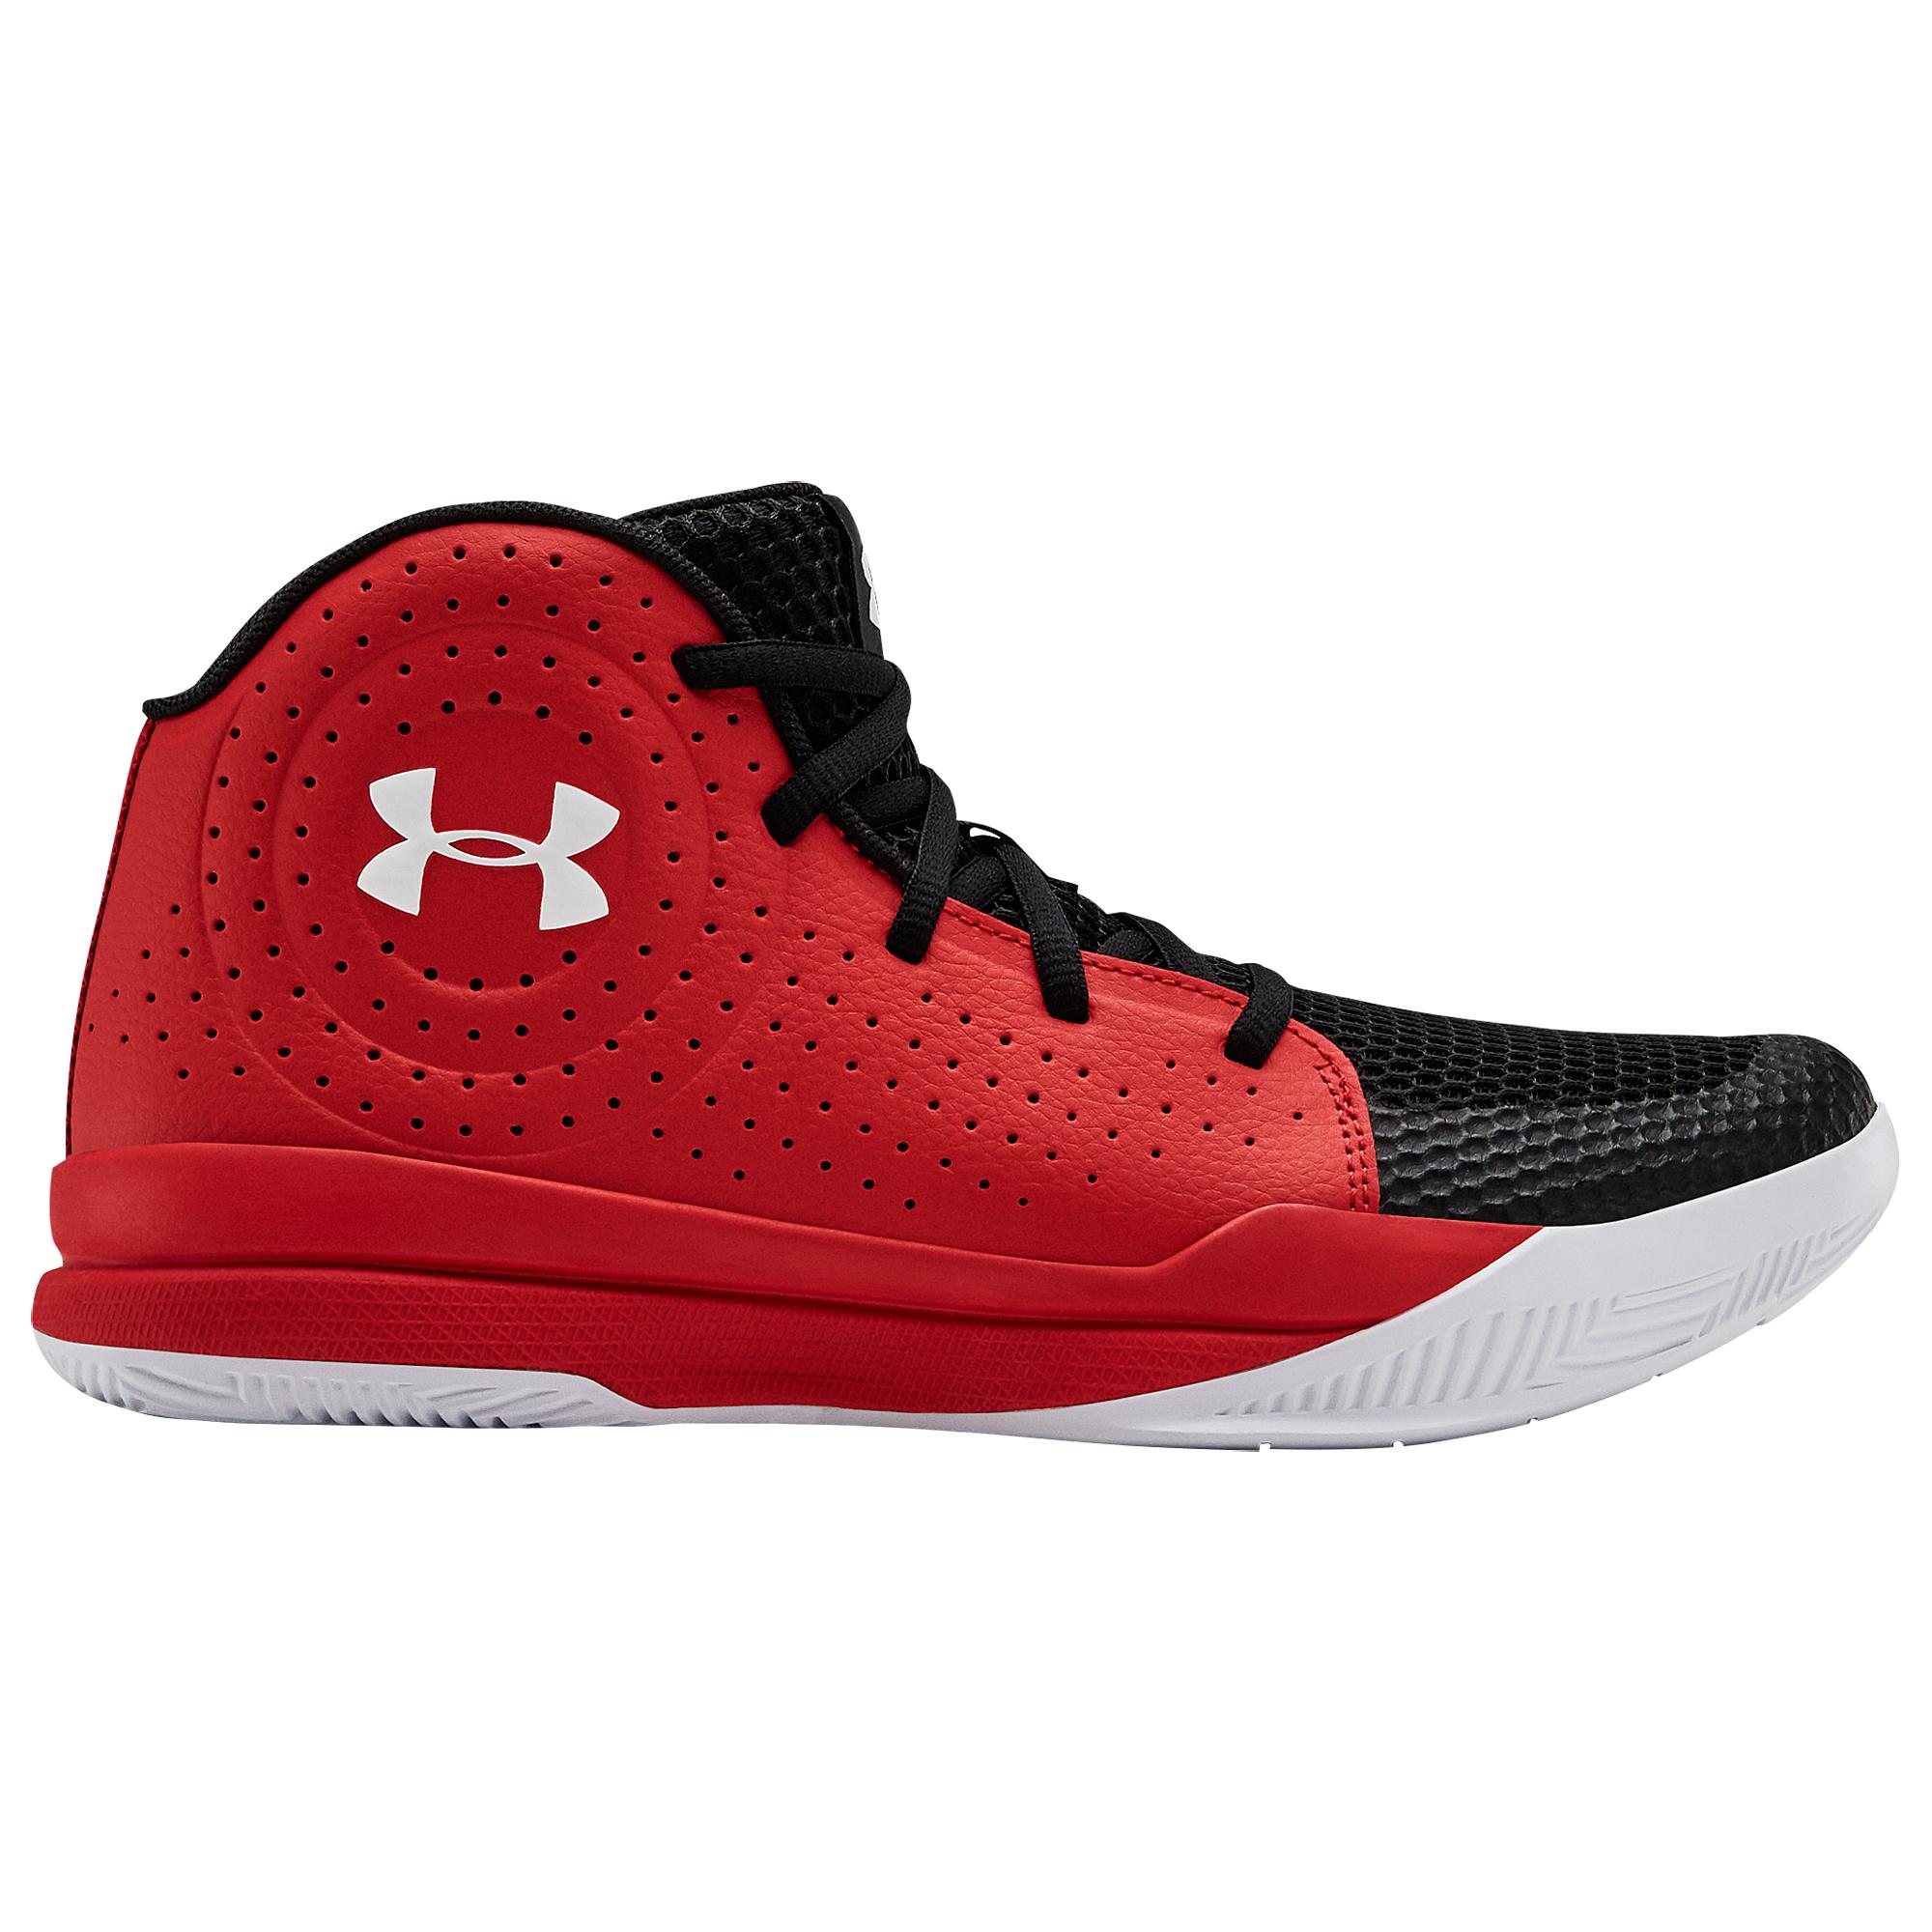 red white and black basketball shoes